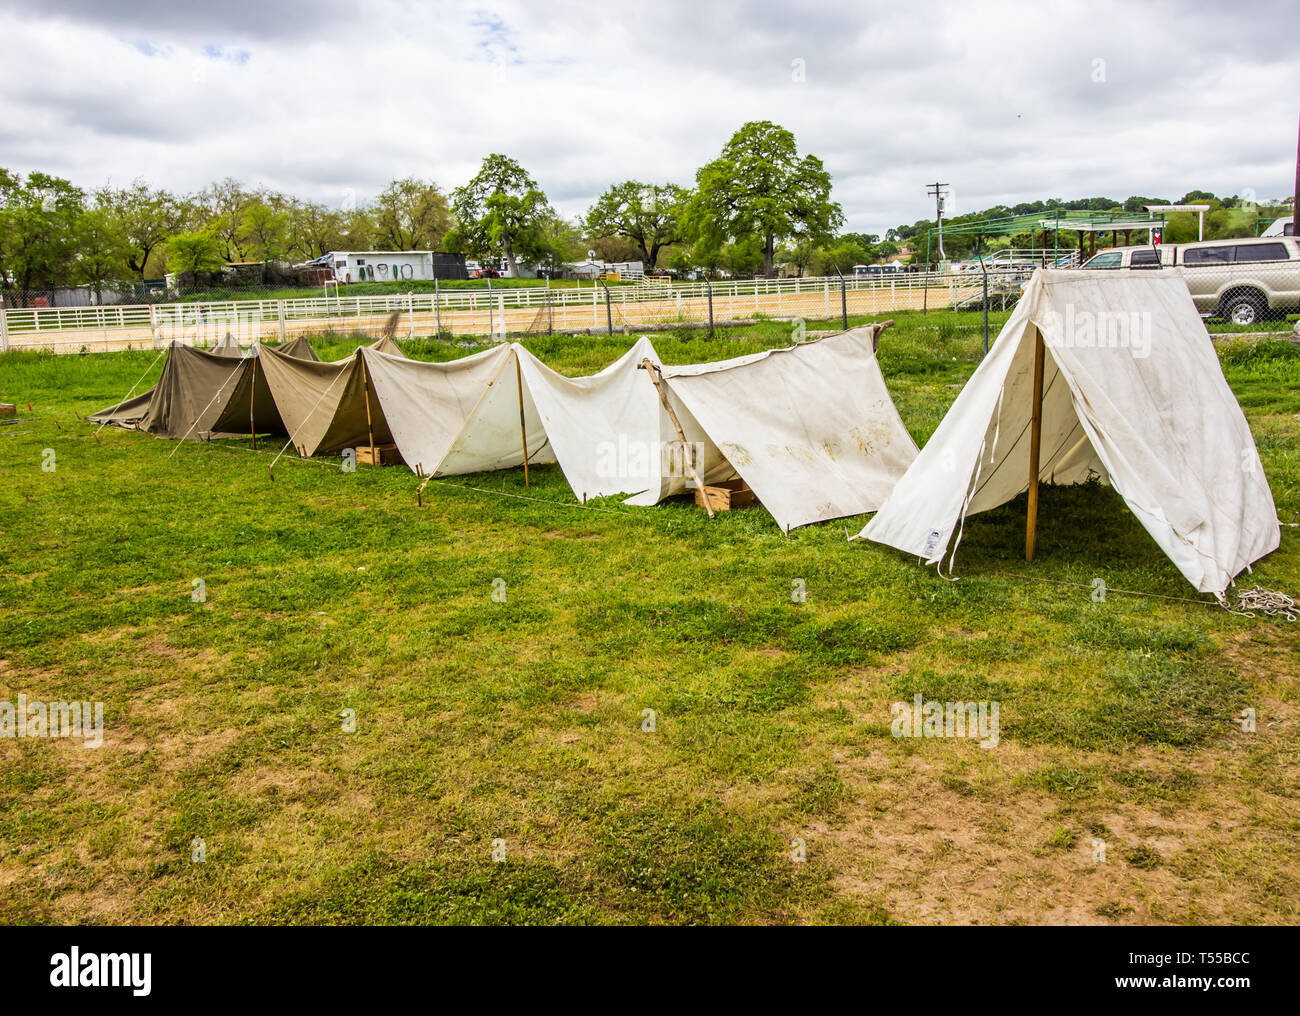 Row Of Pup Tents In Open Field Stock Photo